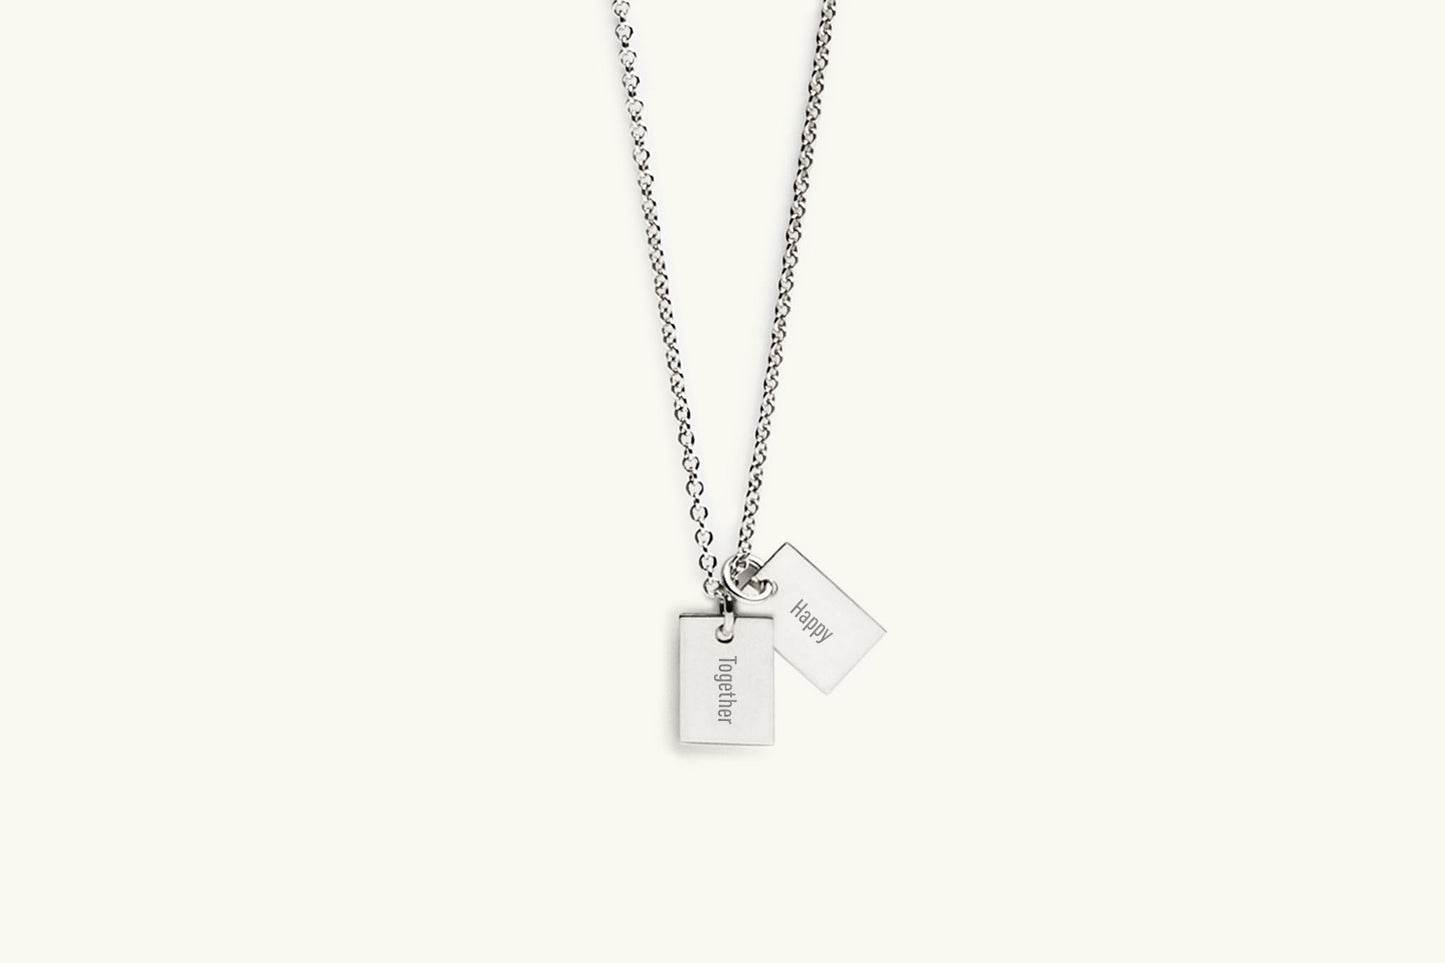 Say Anything Double Charm Necklace